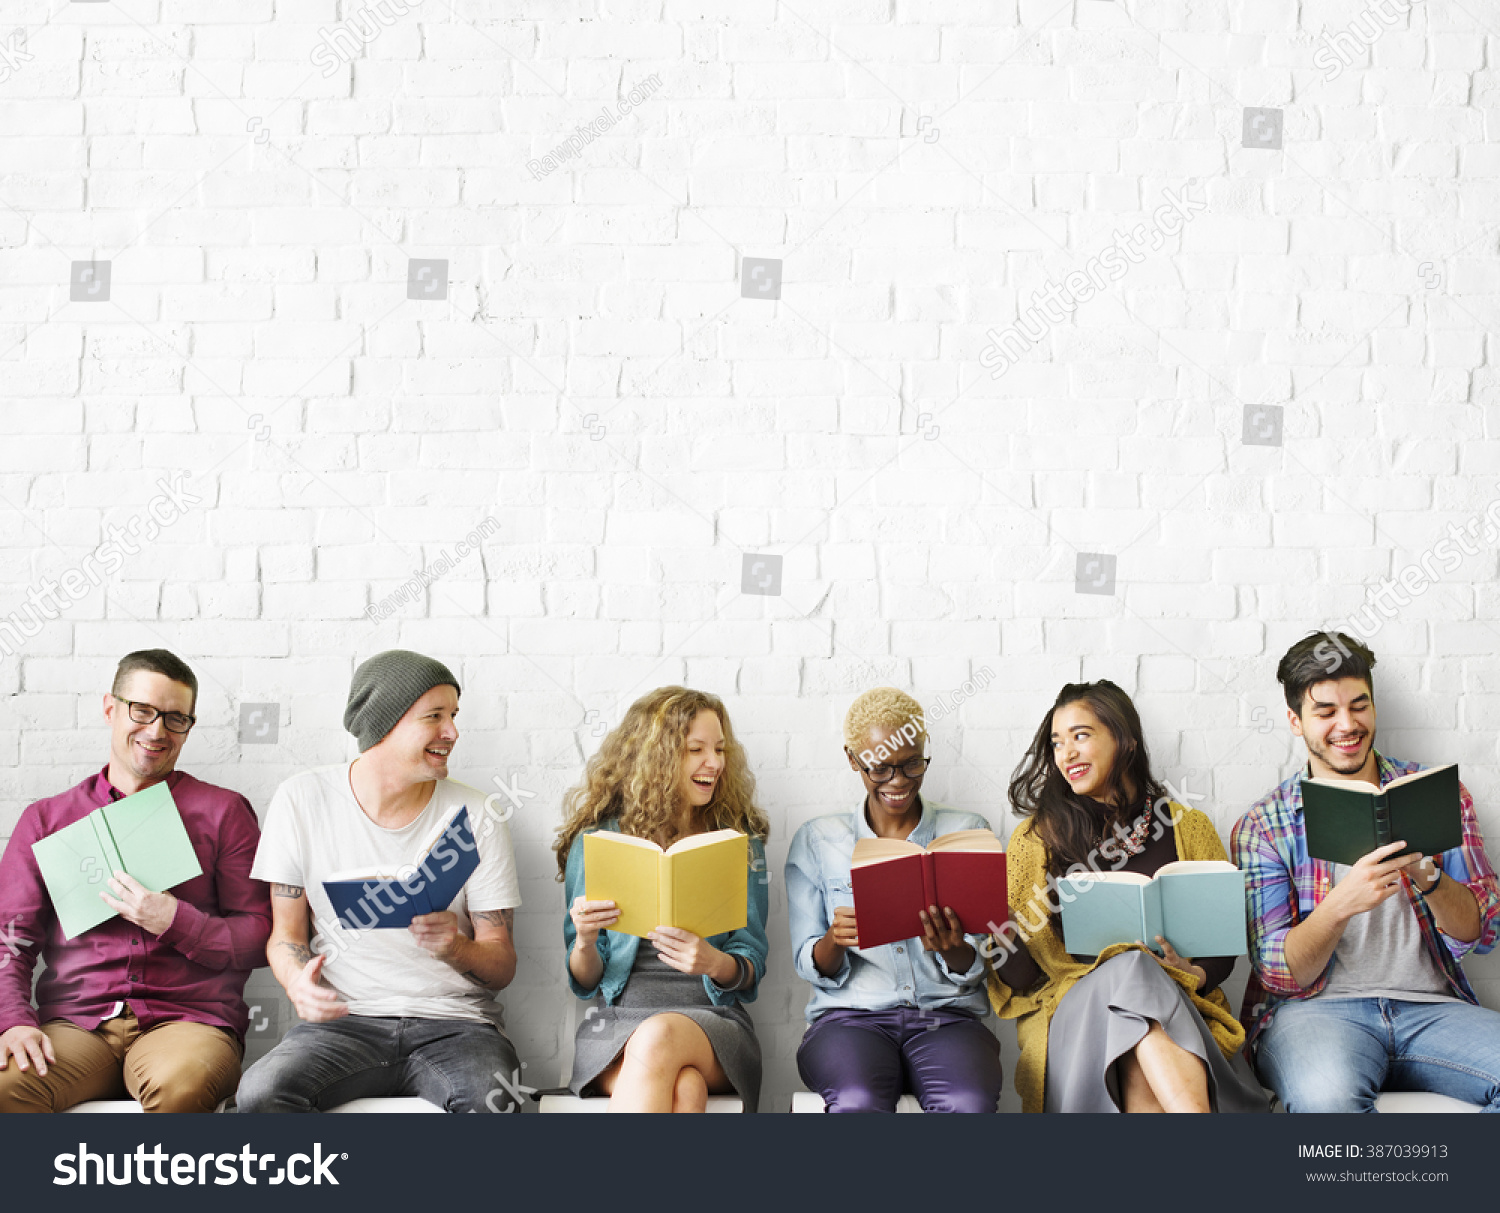 Diverse People Reading Books Study Concept #387039913